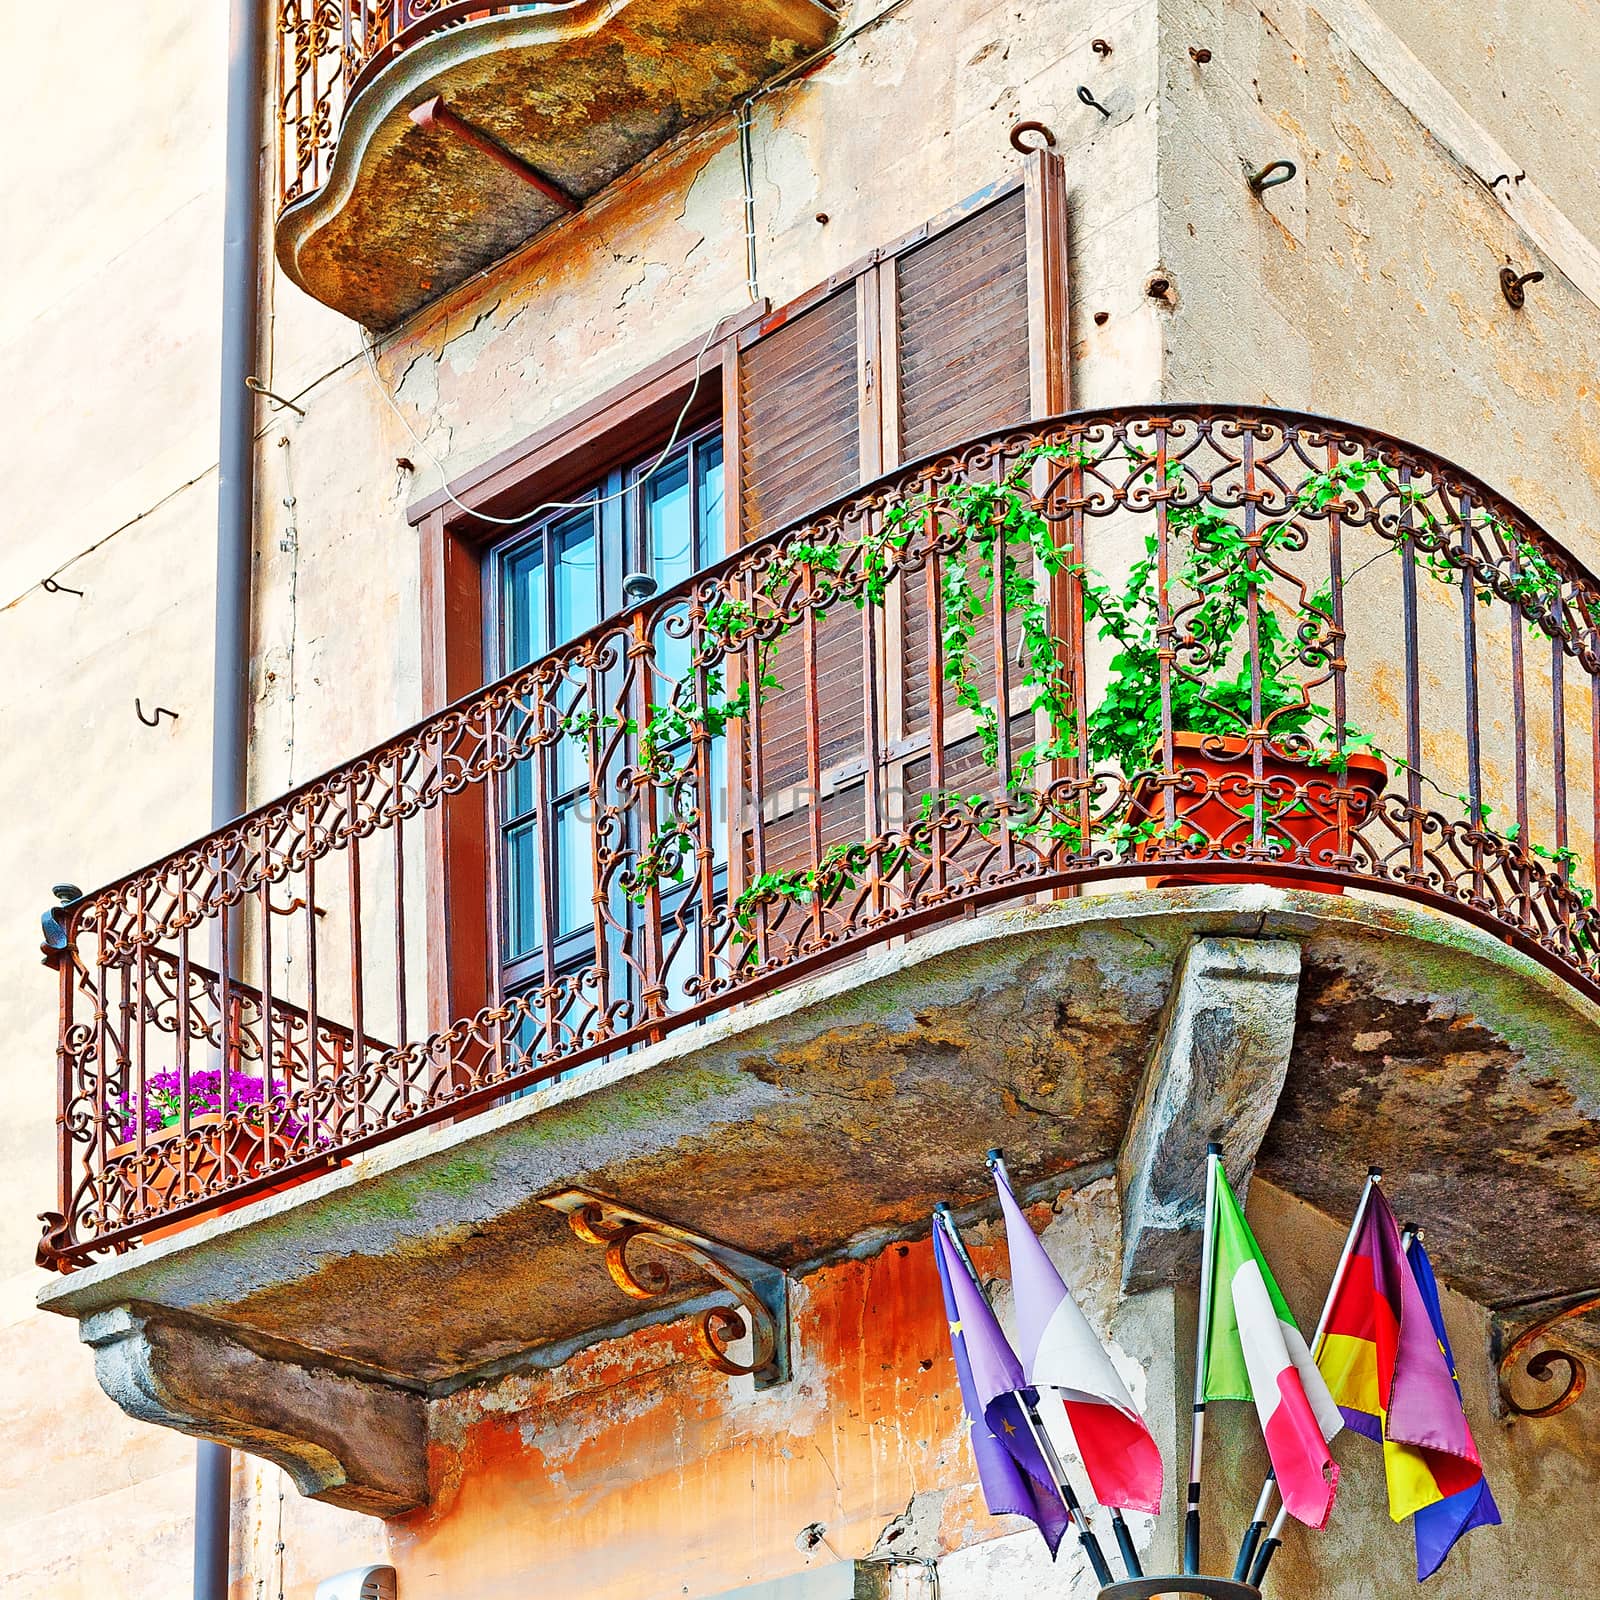 Flags of Italy and the European Union under the Rusty Balcony in the Italian City